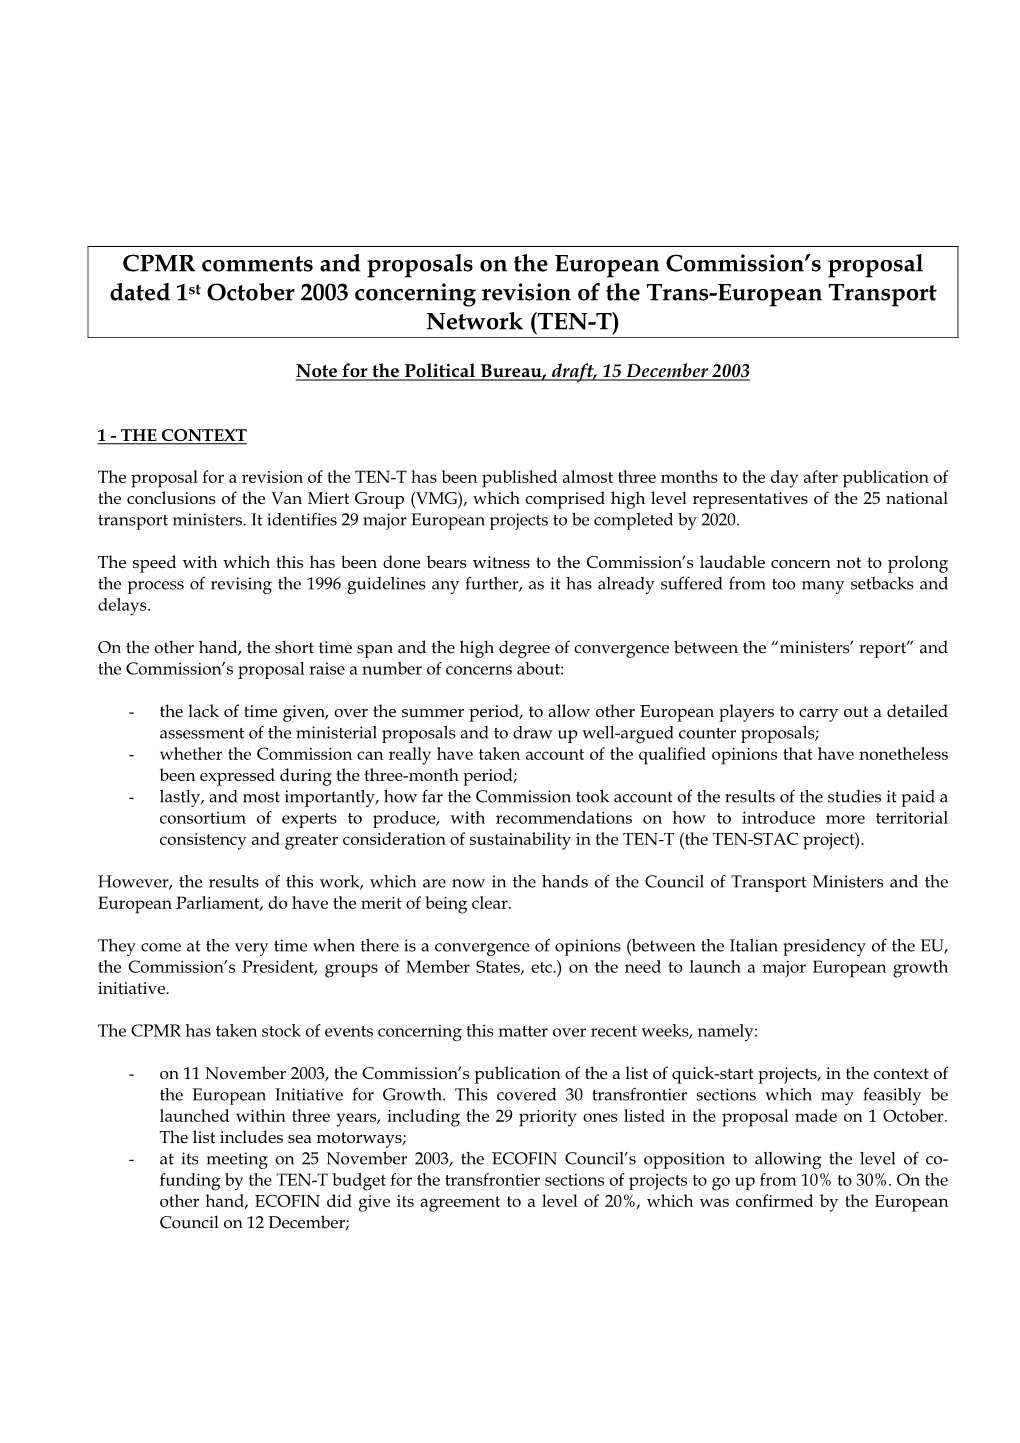 CPMR Comments and Proposals on the European Commission's